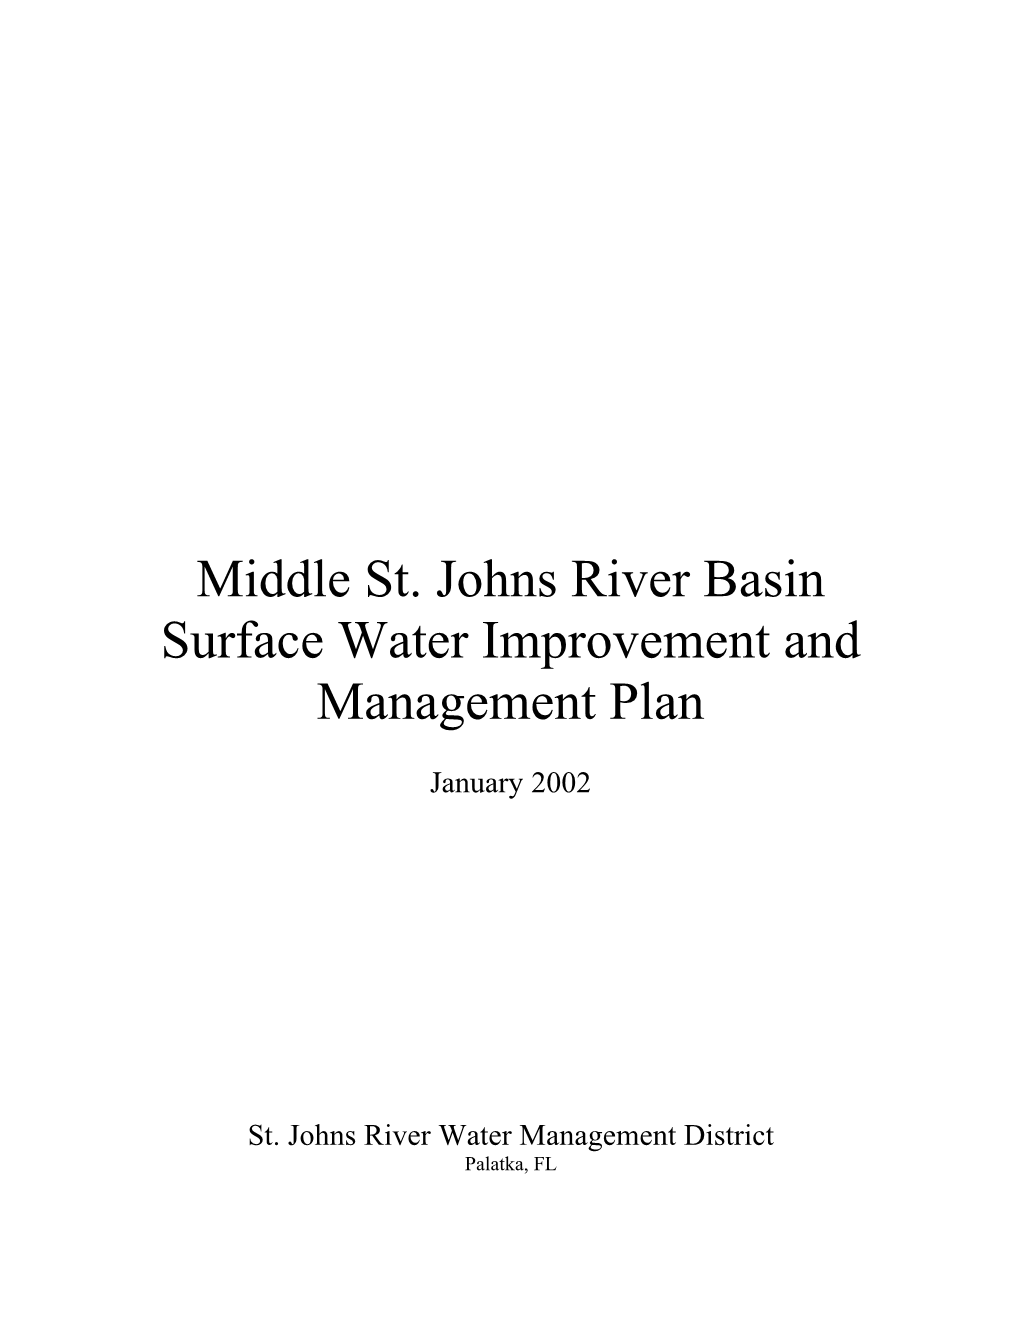 Middle St. Johns River Basin Surface Water Improvement and Management Plan